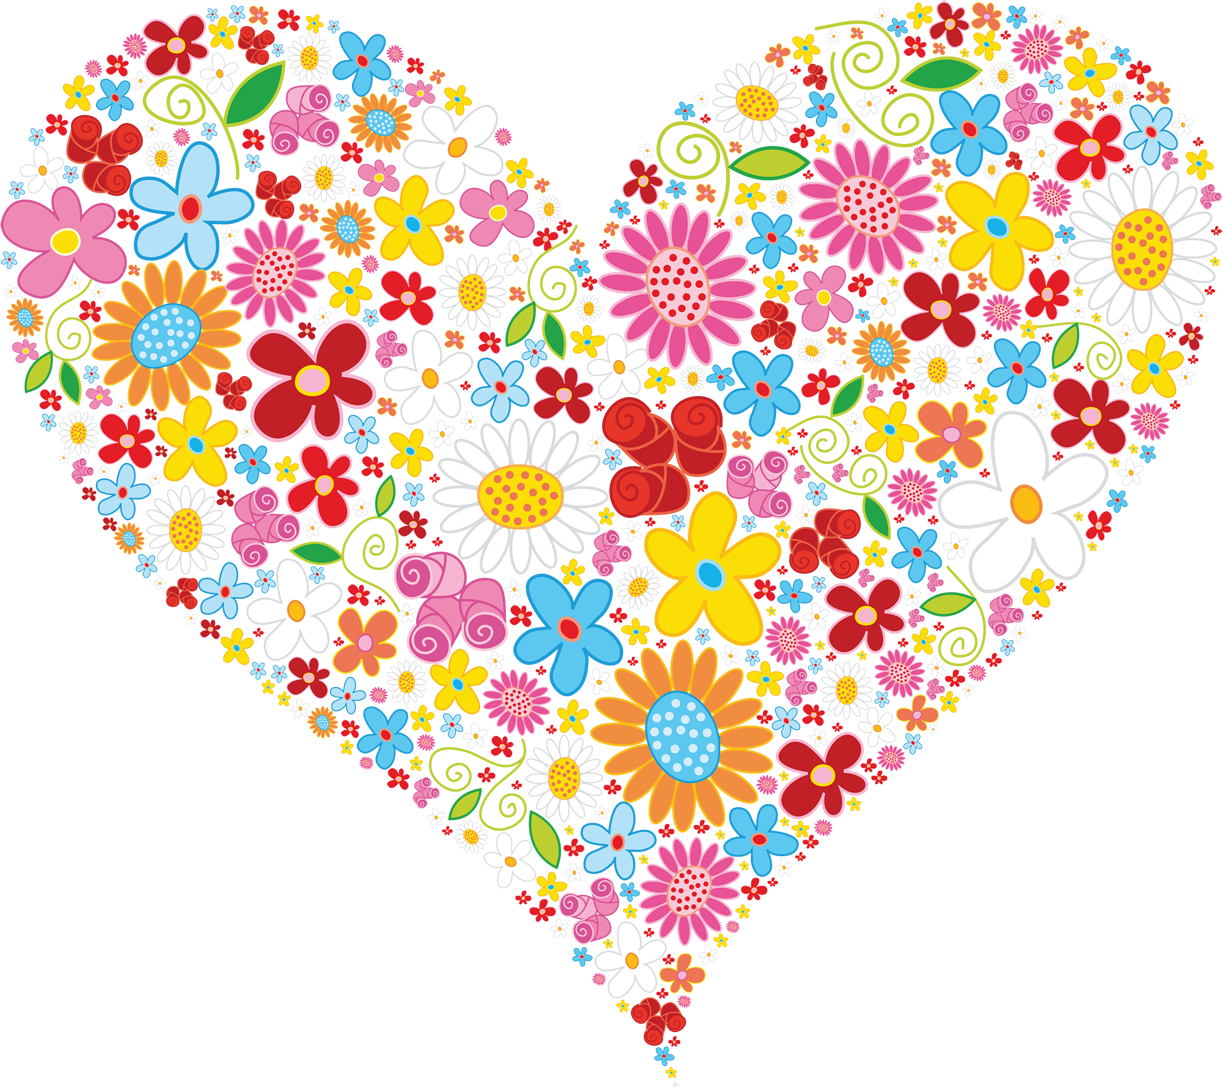 Heart clipart beautiful heart made up of colorful flowers